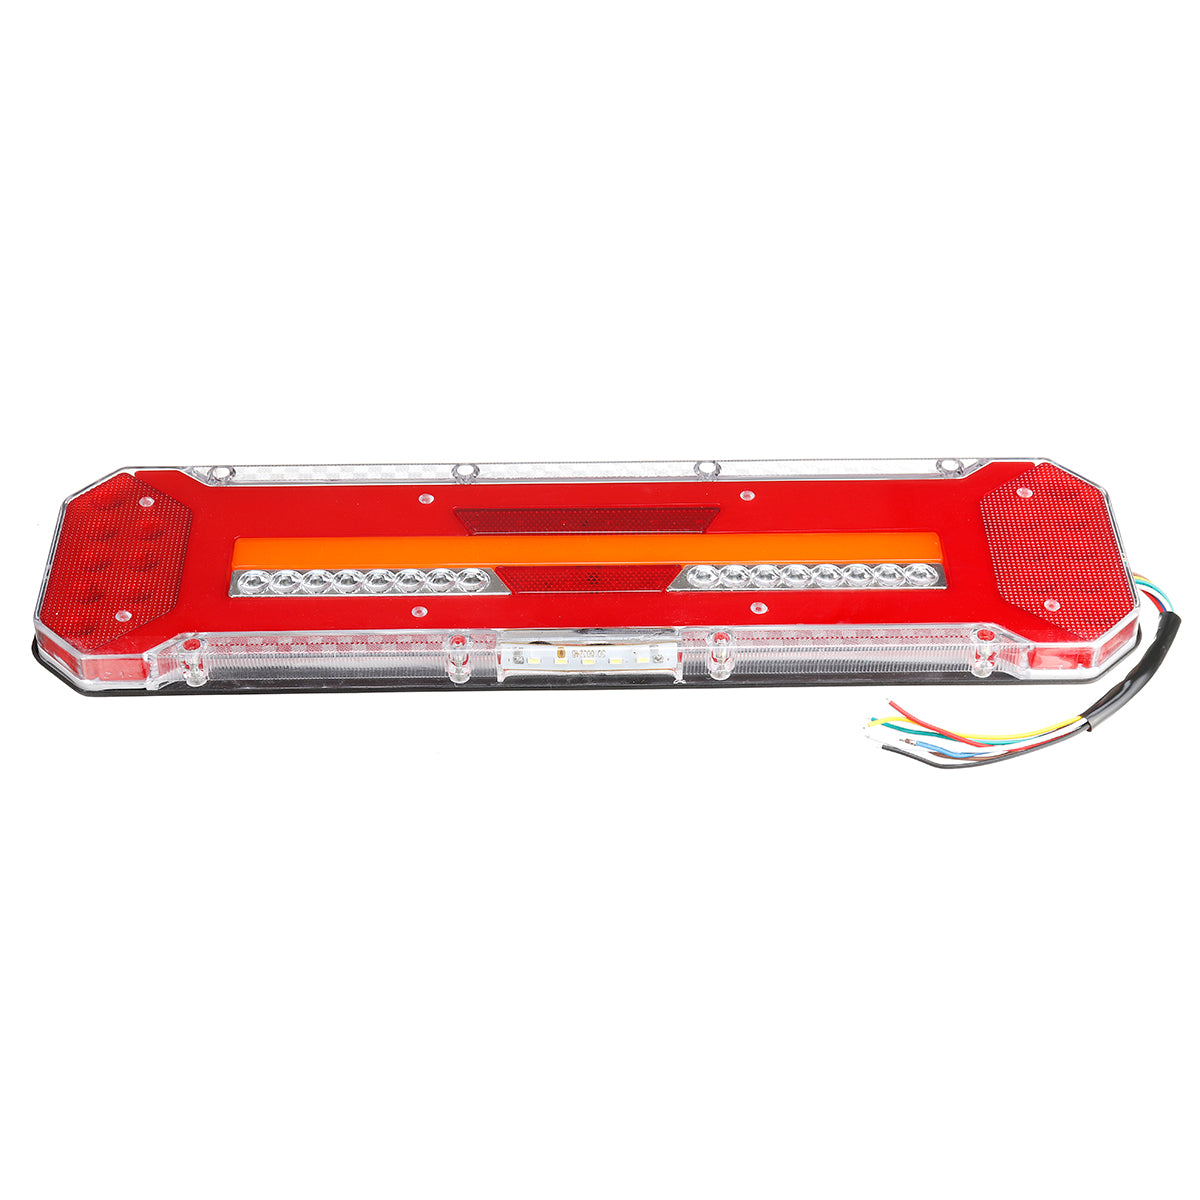 Firebrick 24V LED Flowing Rear Tail Light Turn Signal Brake Reverse Stop Lamp For Trailer Truck Lorry Bus Boat